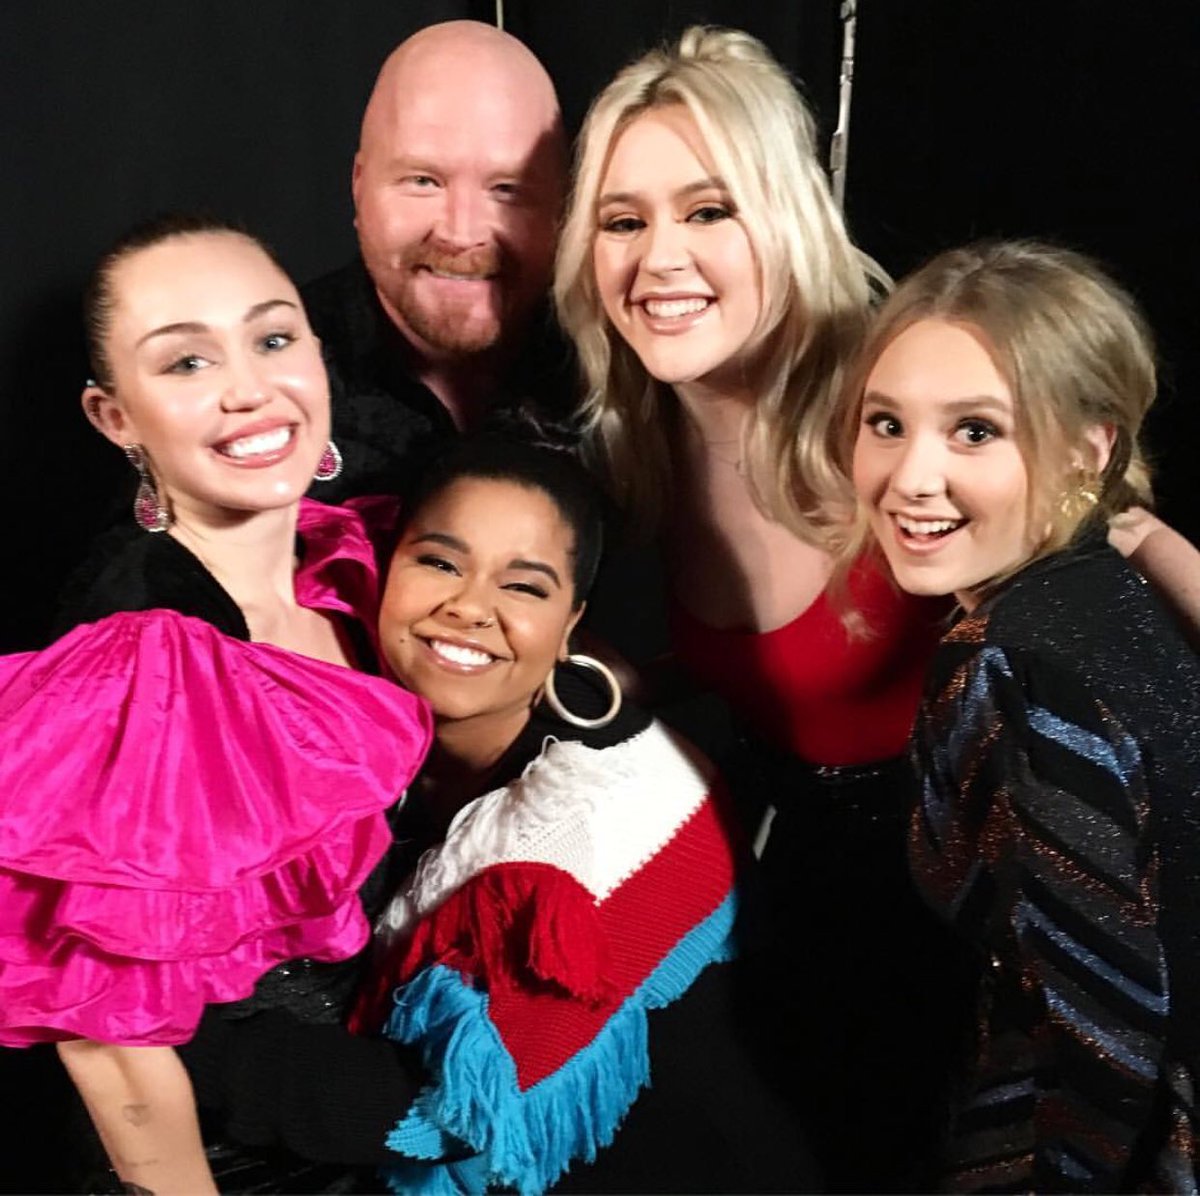 The best of the best. @nbcthevoice https://t.co/bbMZt7HLiP